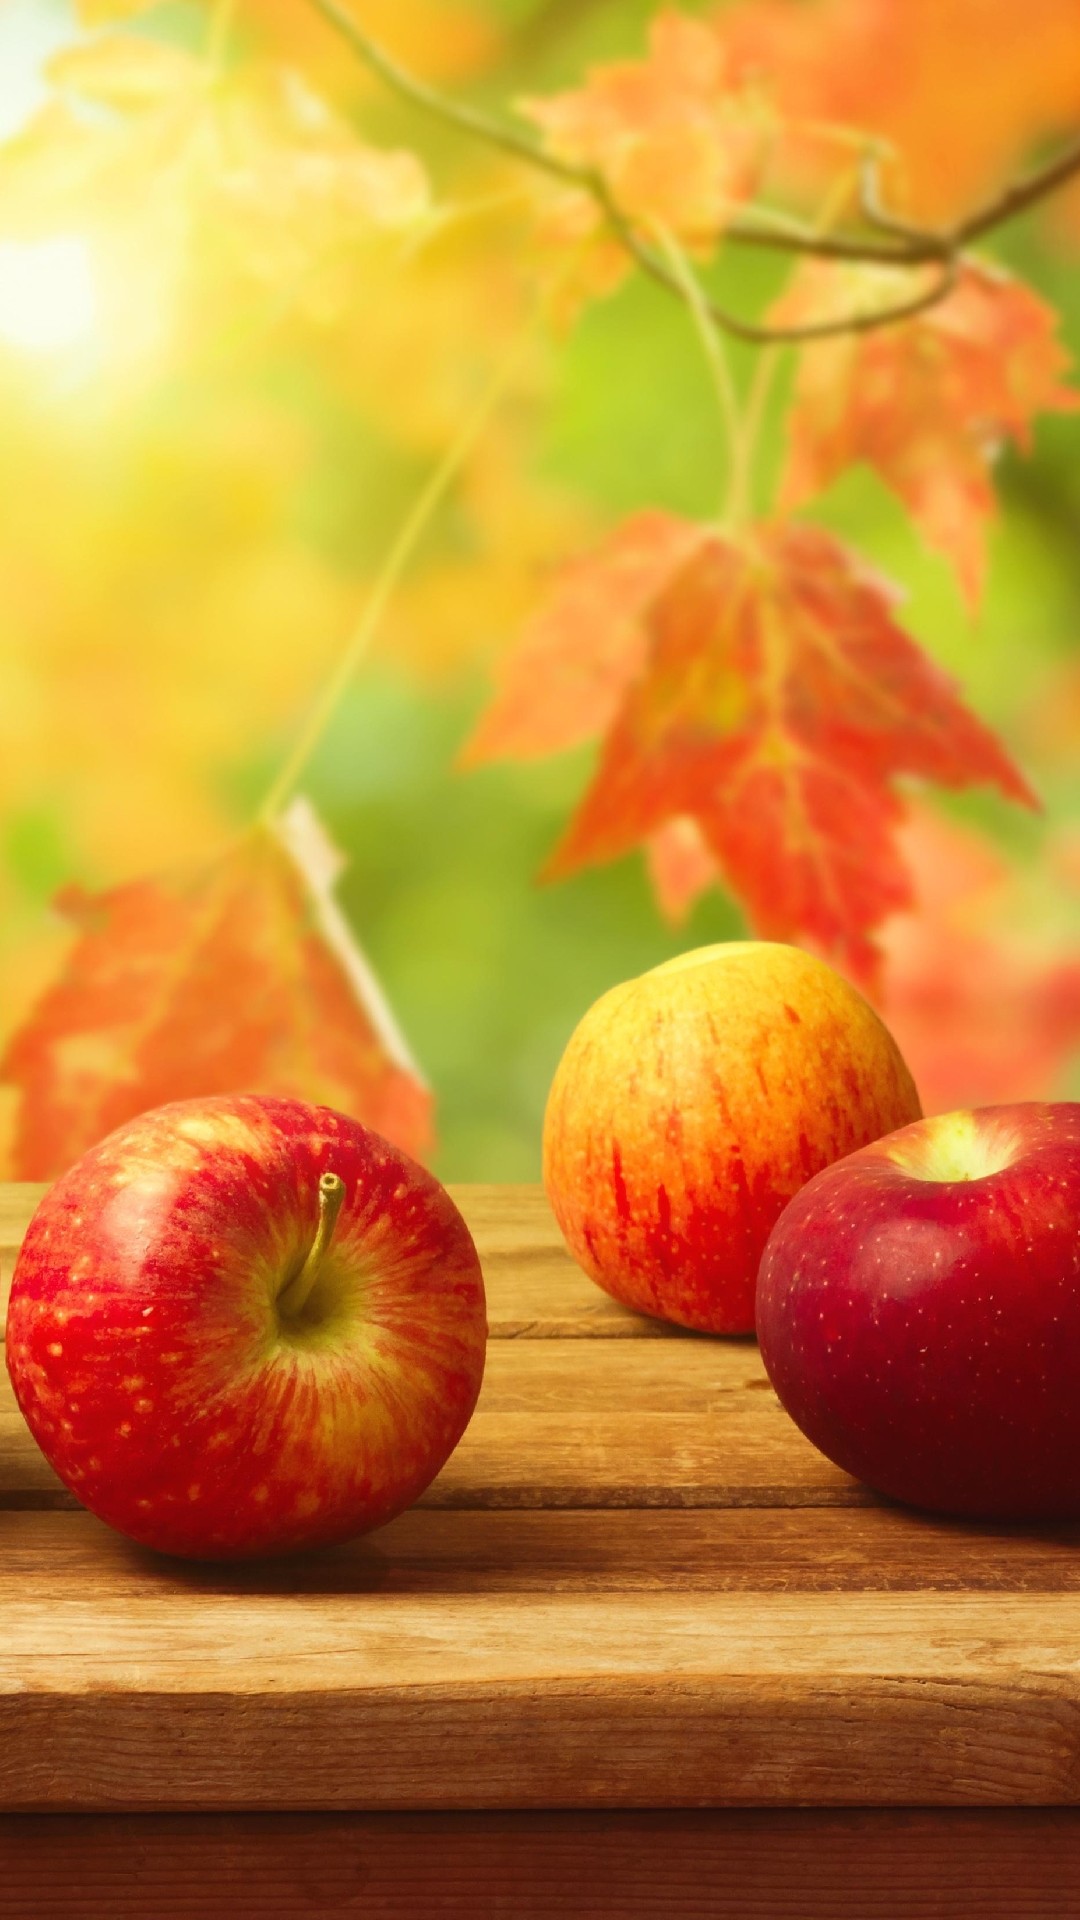 1080x1920 Fall apples on a table. More choice: iPhone 6 Plus Wallpapers